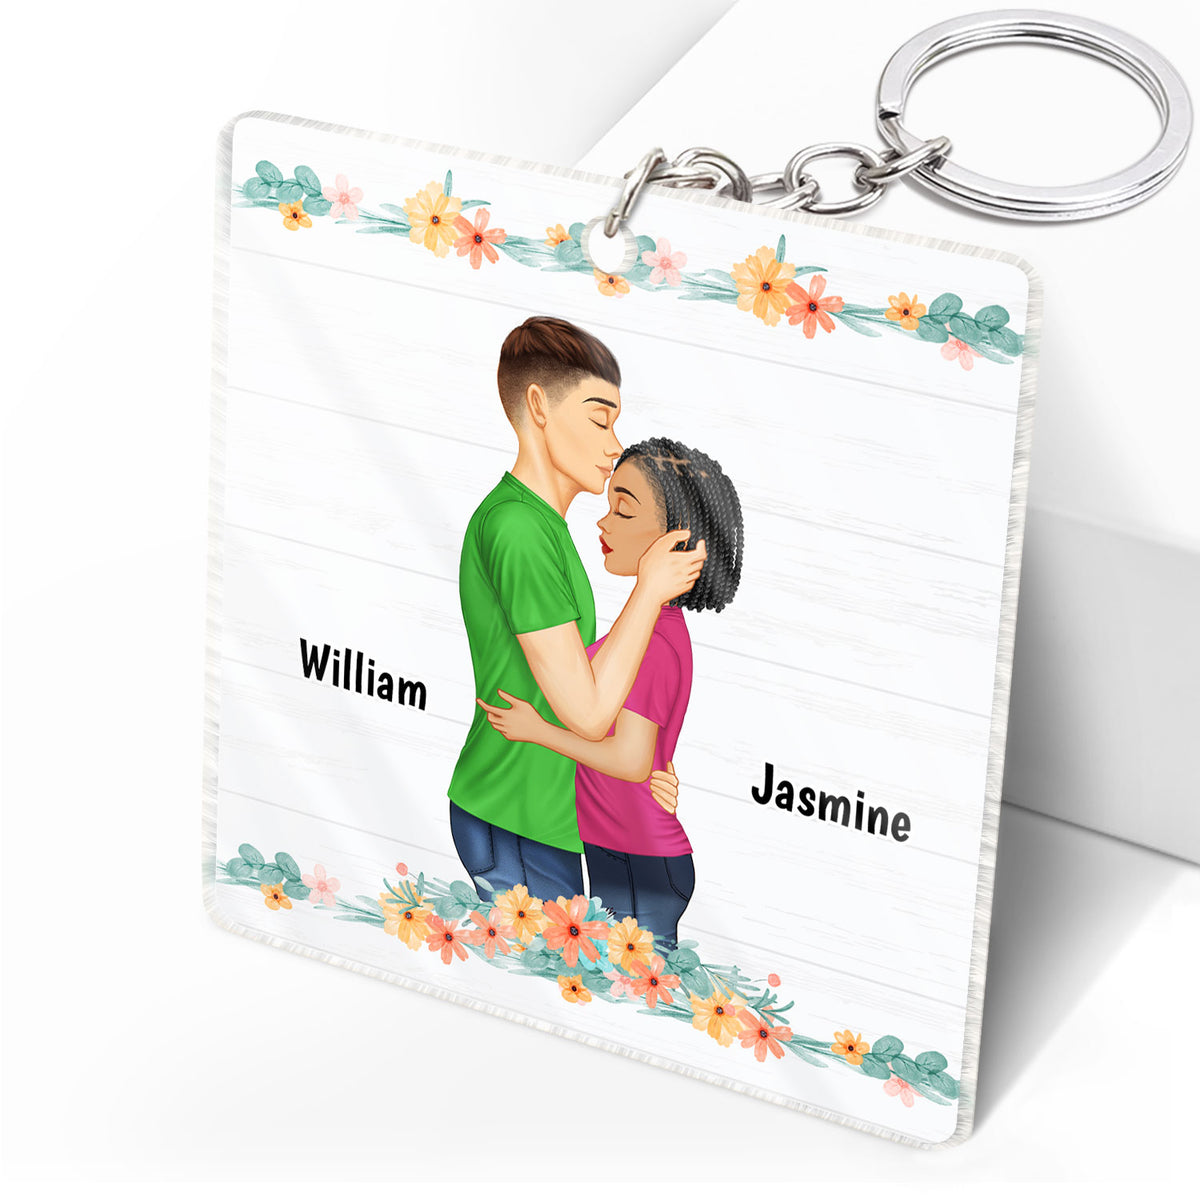 COUPLE MY FAVORITE PLACE IS NEXT TO YOU, PERSONALIZED ACRYLIC Keychain -  yeetcat